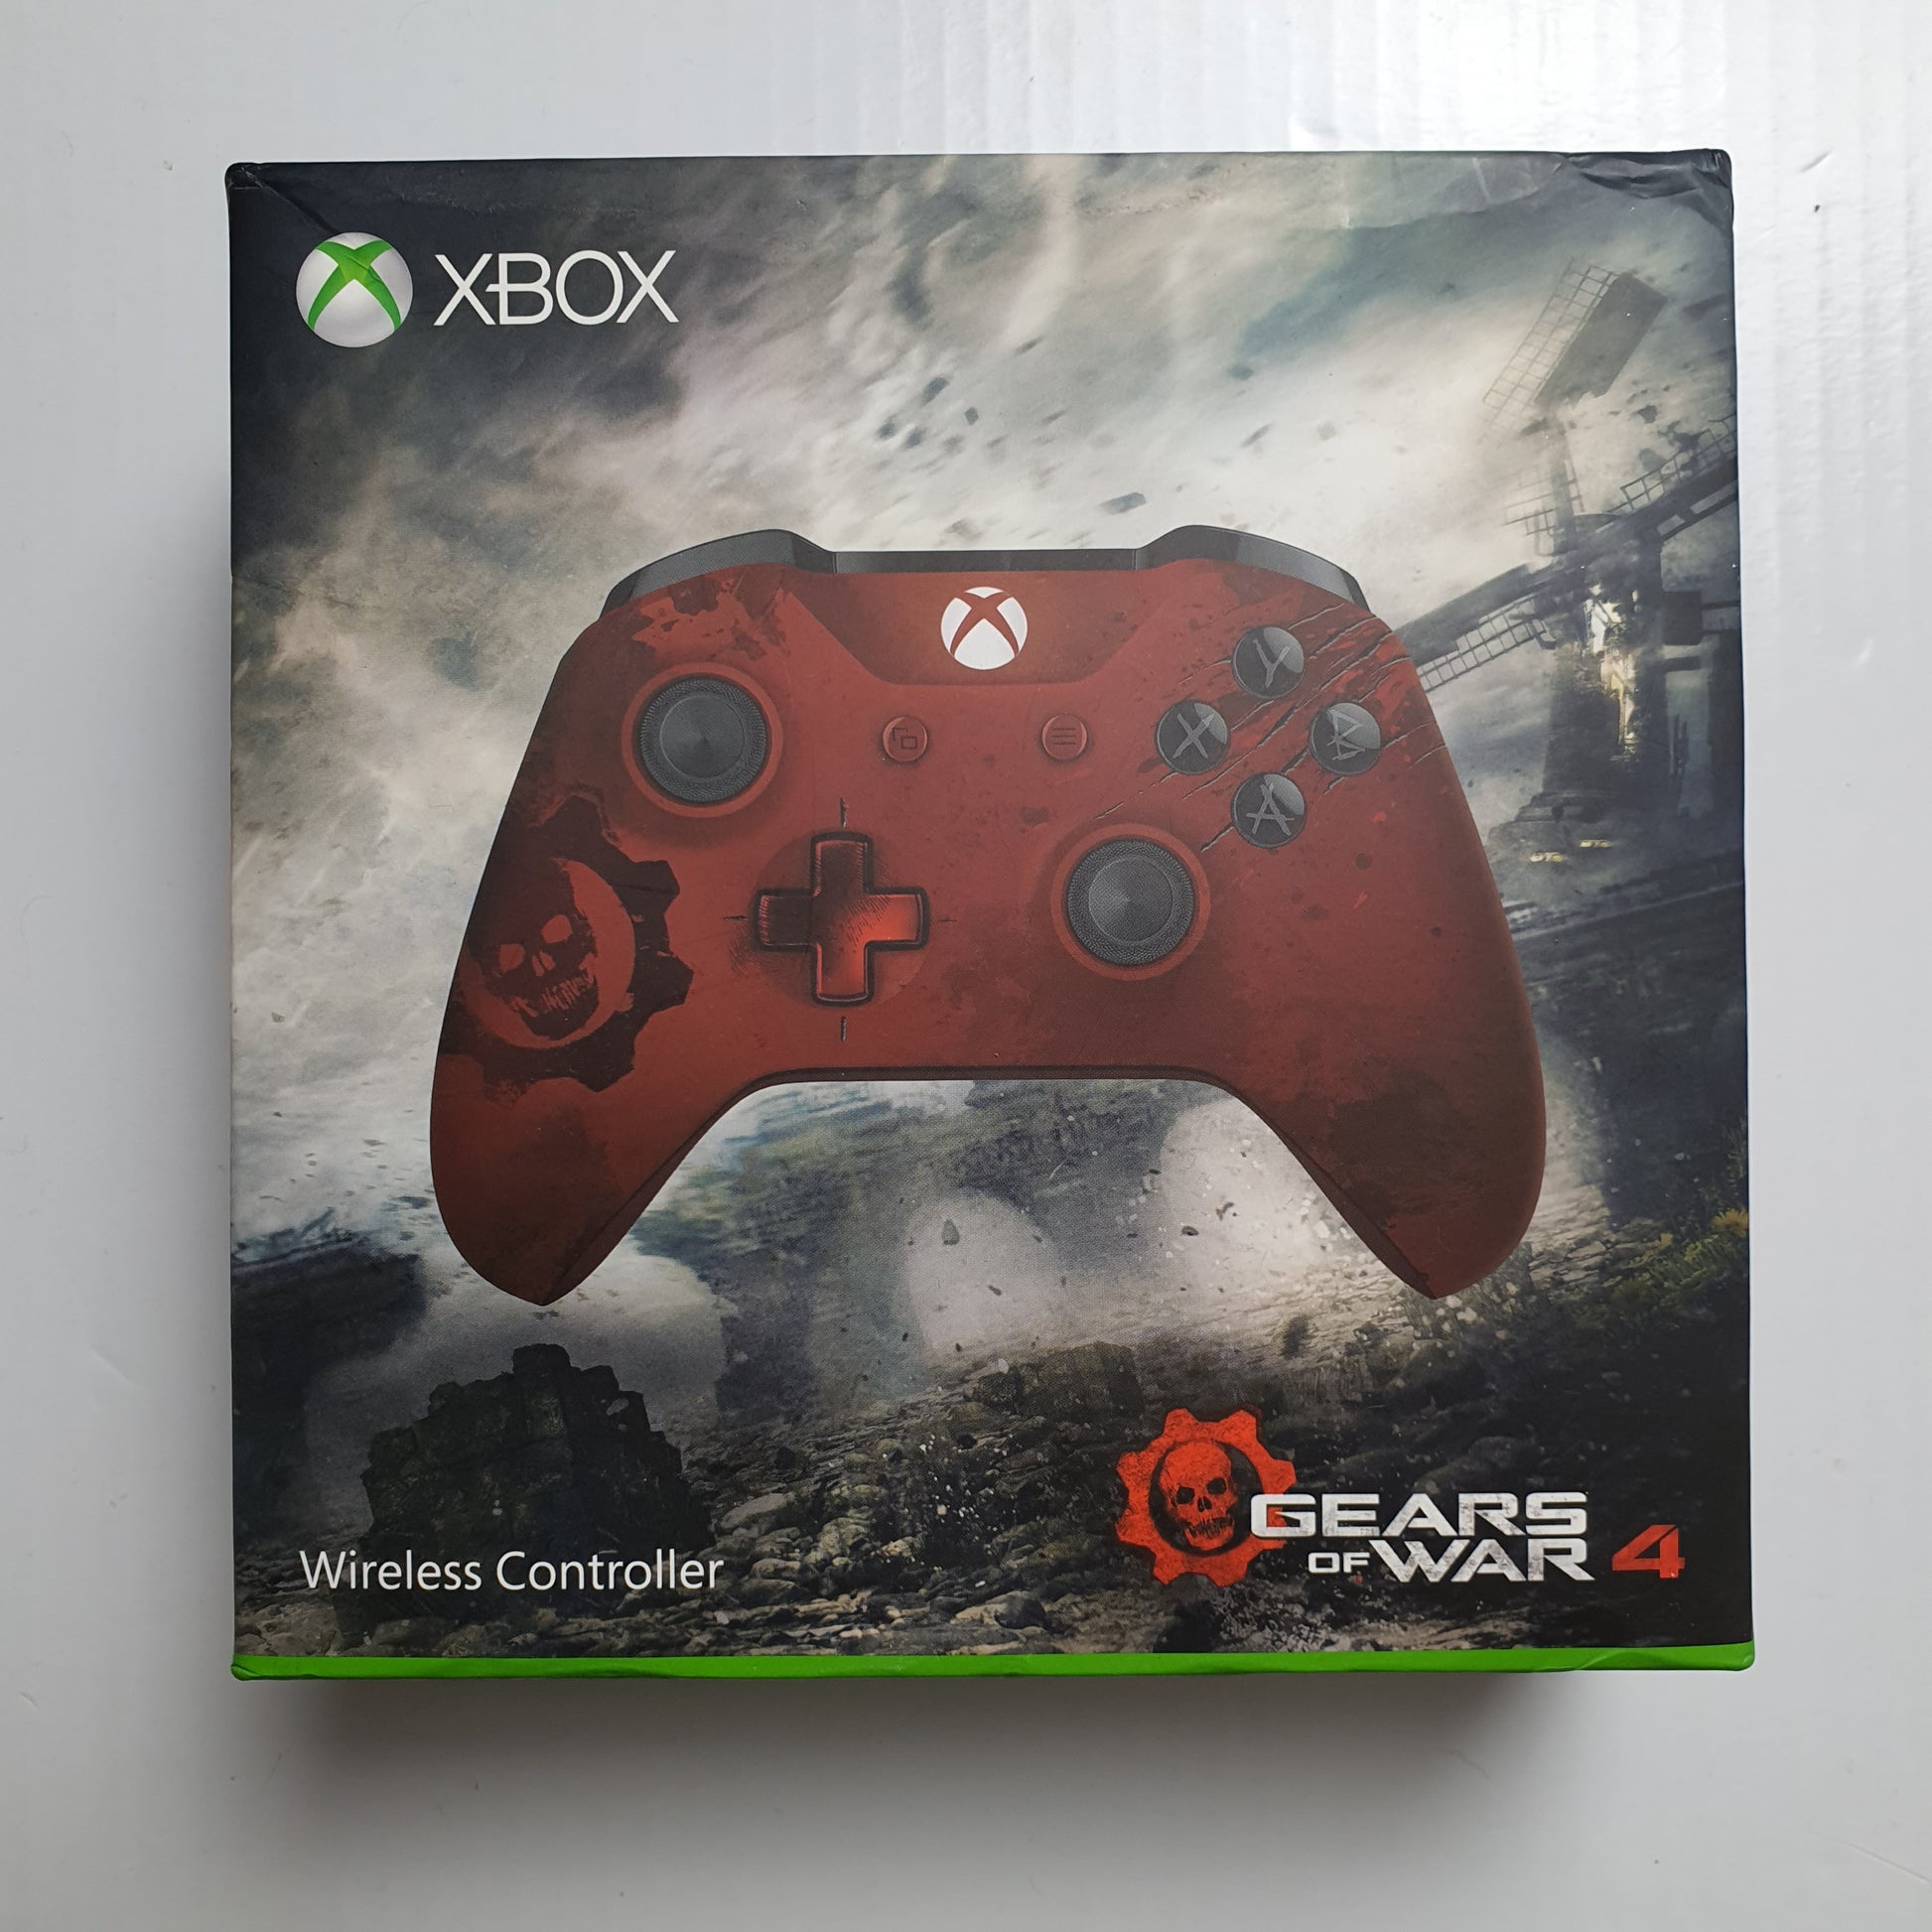 Gears of War 4 Limited Edition Xbox One S and Two Controllers